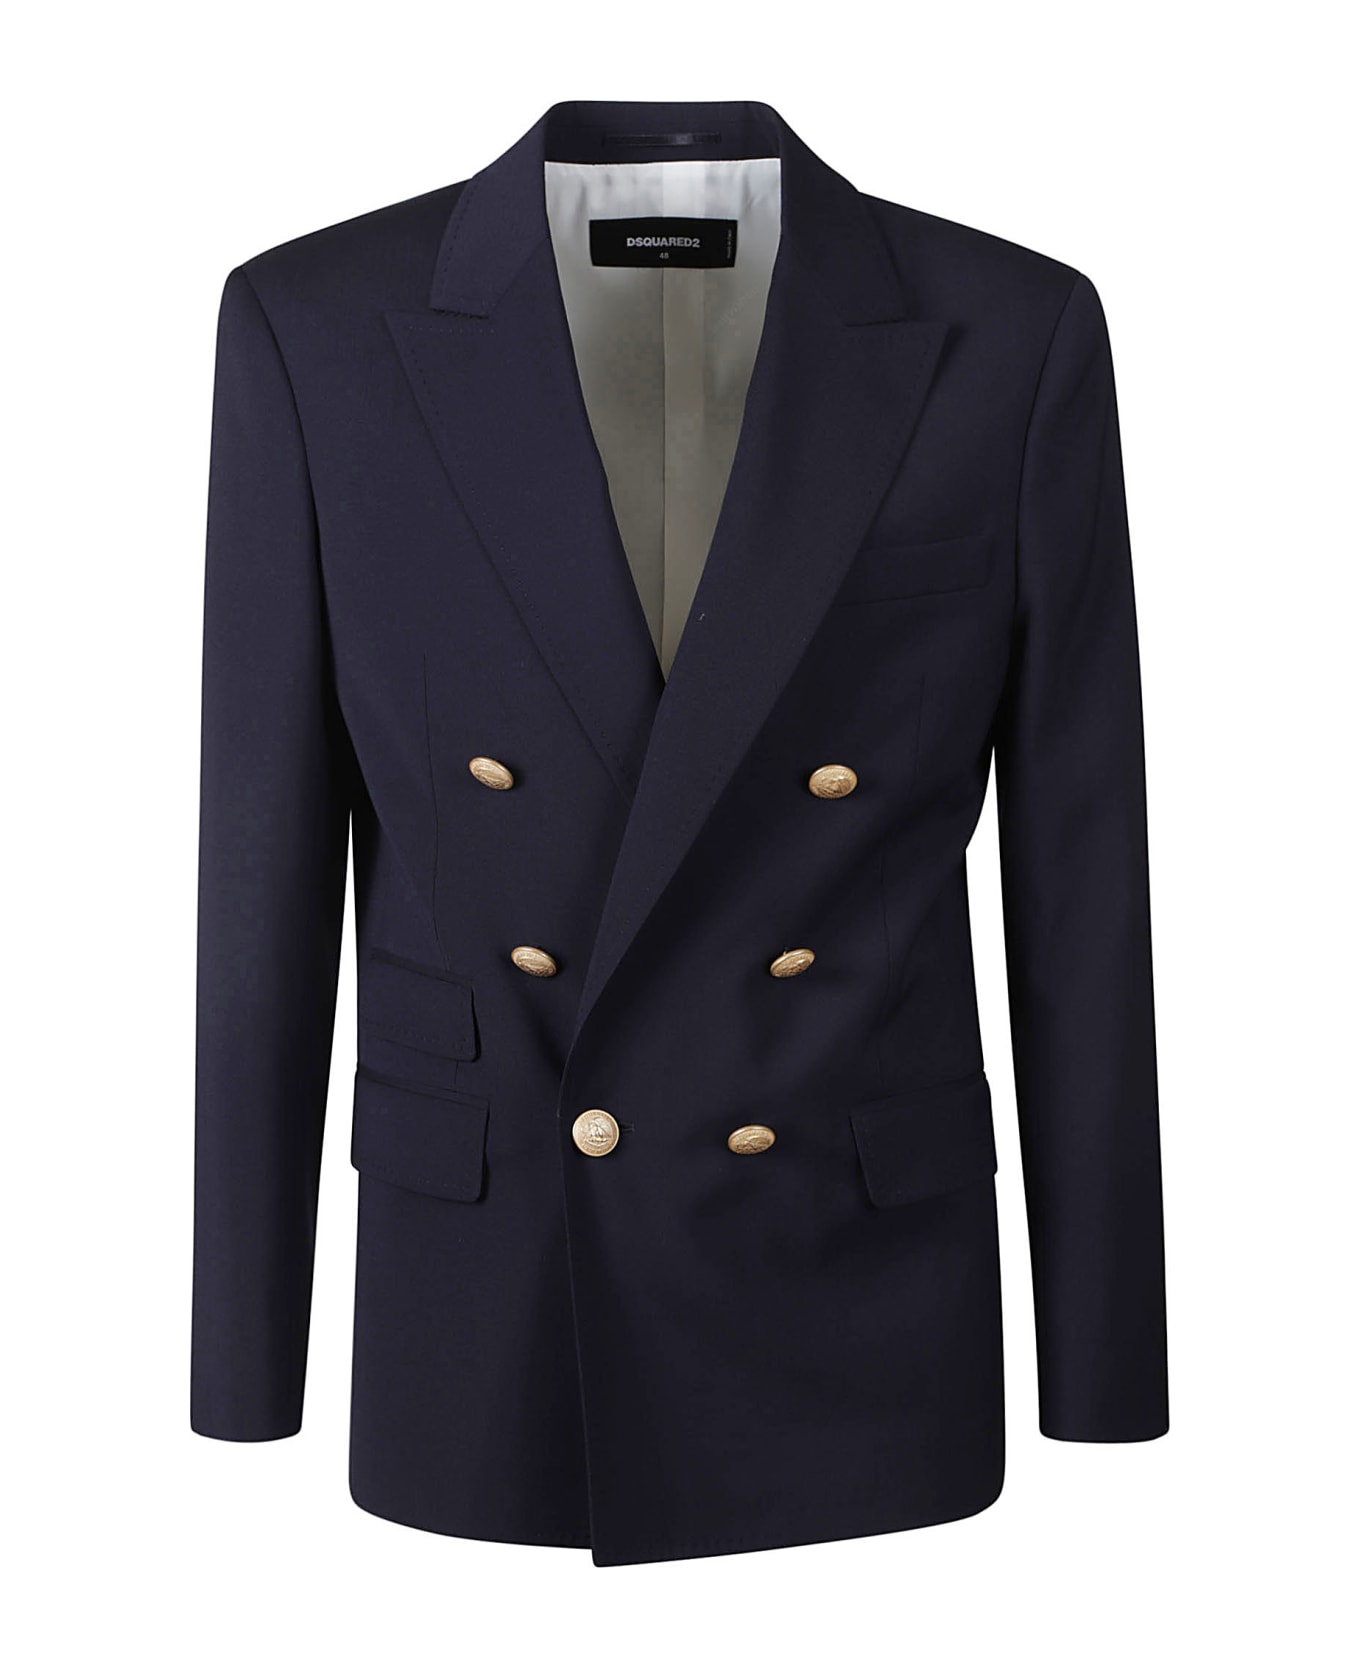 Dsquared2 Palm Beach Double Breasted Blazer - Navy Blue